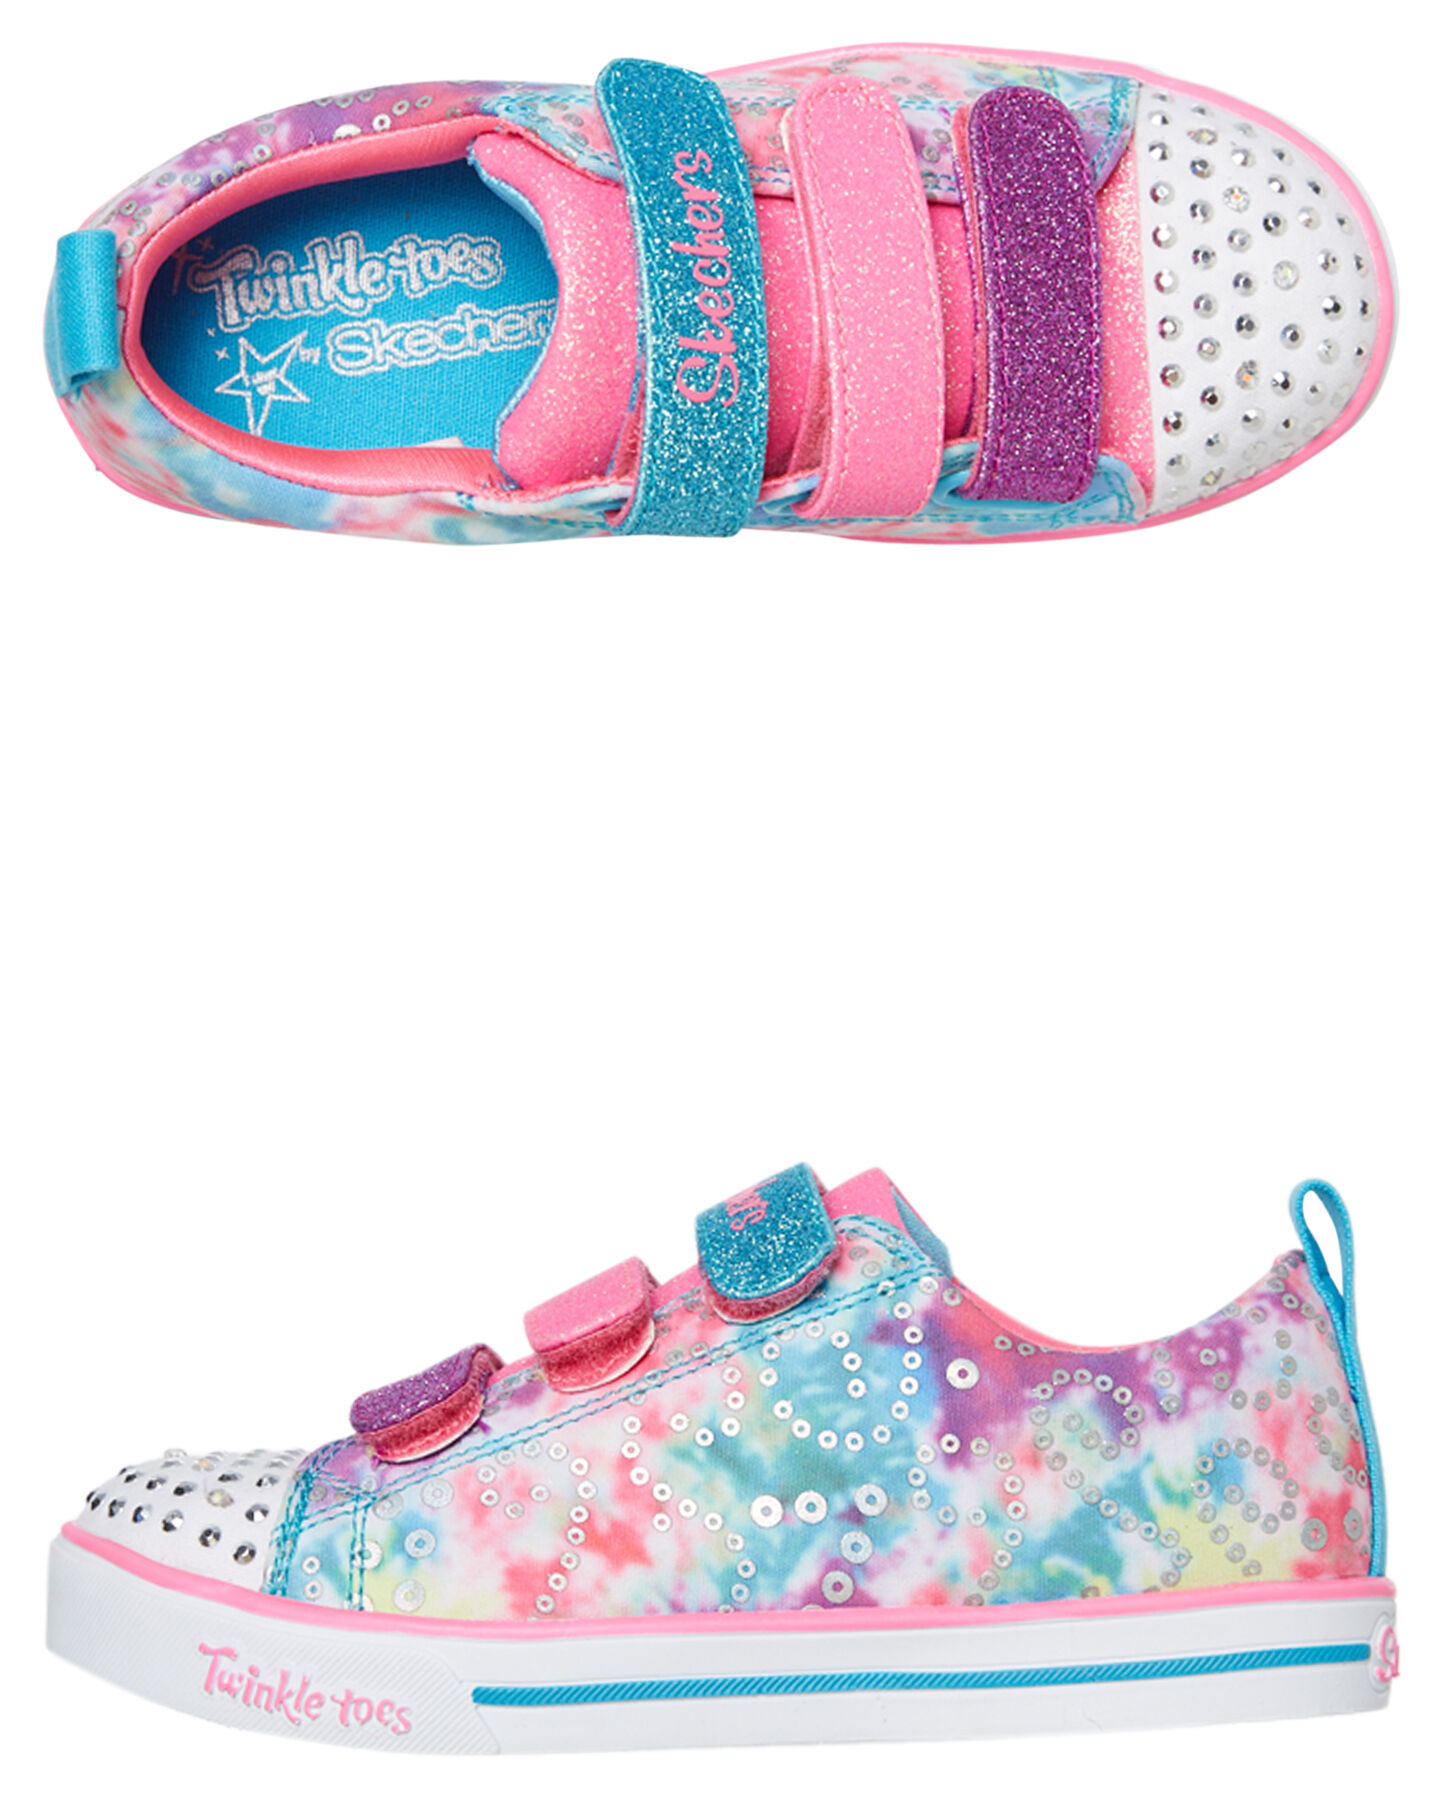 skechers twinkle toes afterpay